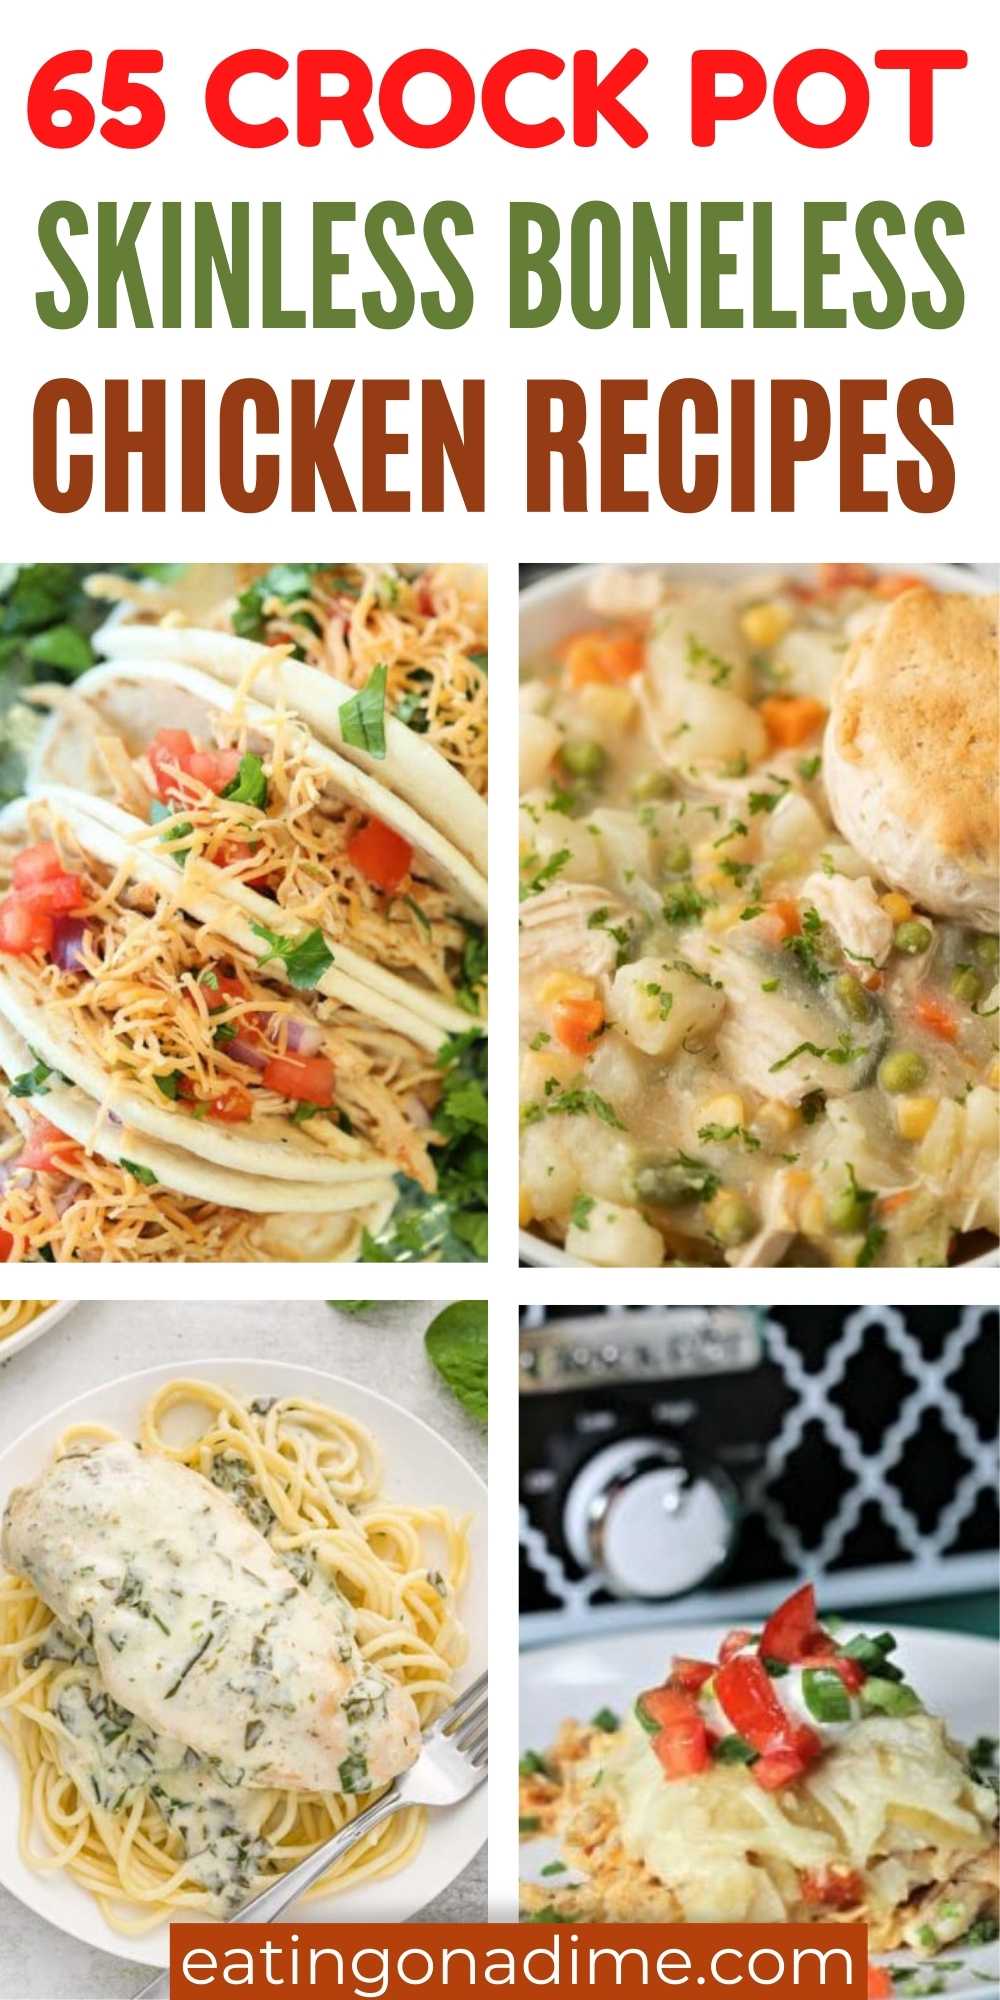 Boneless skinless chicken crockpot recipes that will make dinner time a breeze. 65 of the best recipes using boneless skinless chicken. These slow cooker are made with simple ingredients. #eatingonadime #slowcookerrecipes #skinlesschickenrecipes